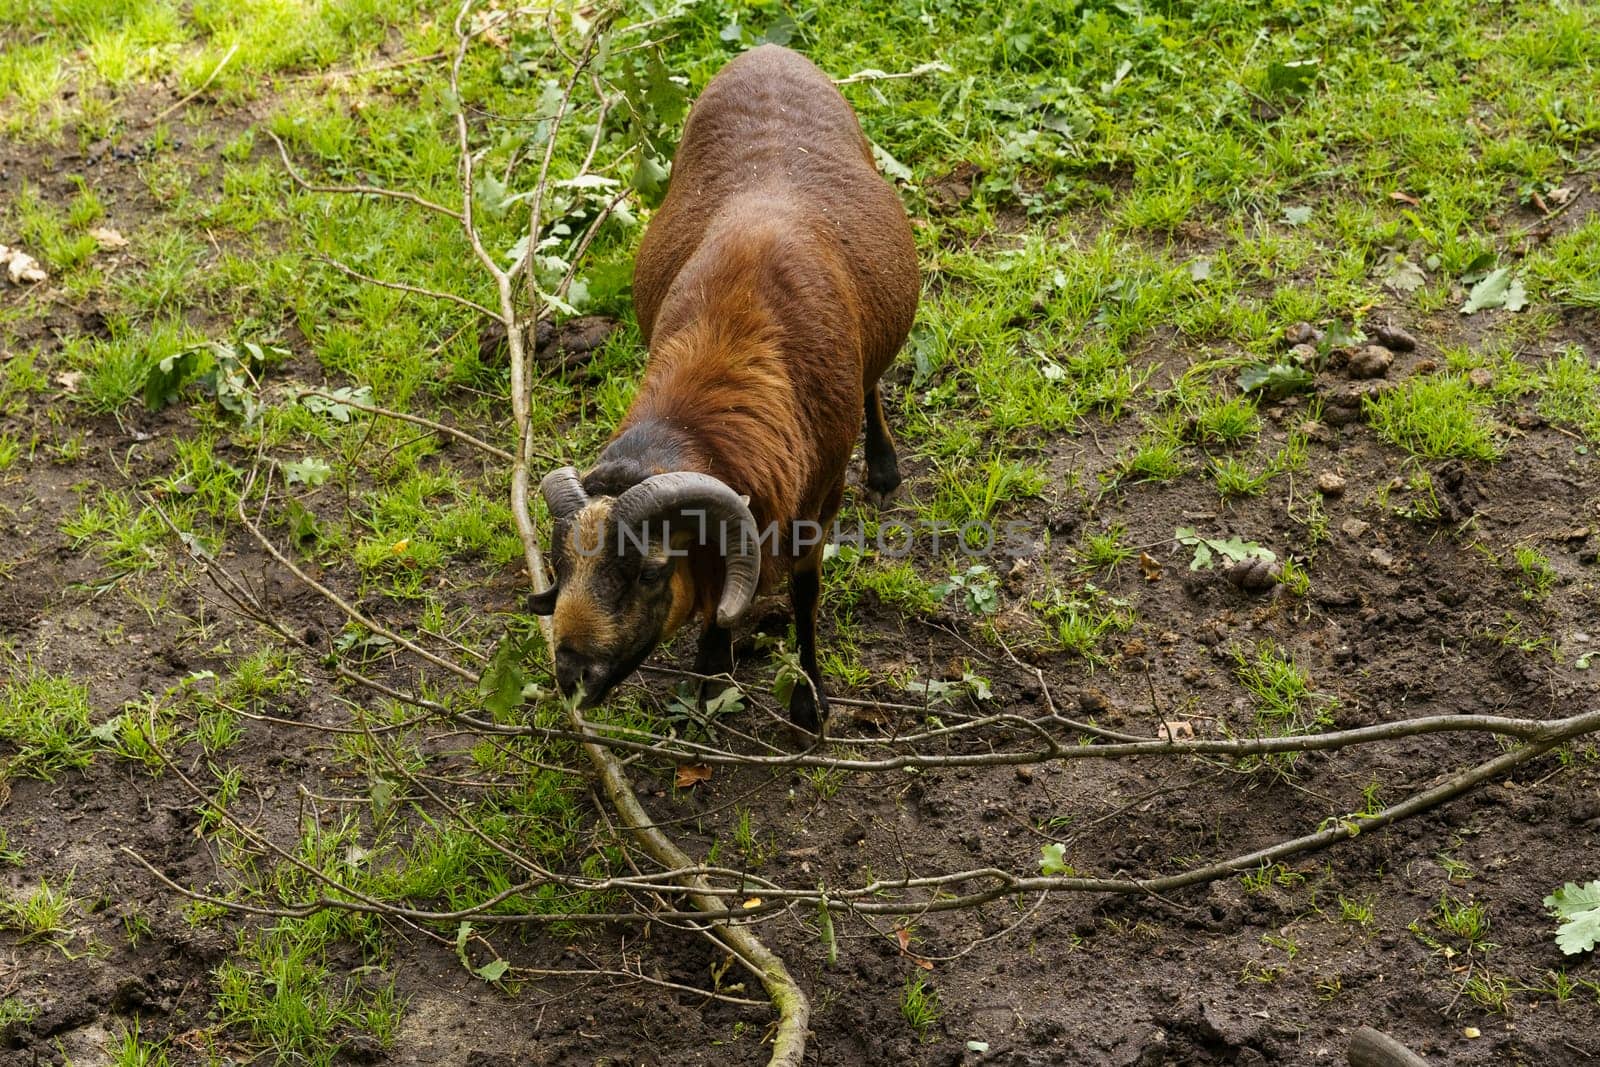 A brown ram stands confidently in a bright green field surrounded by lush vegetation.